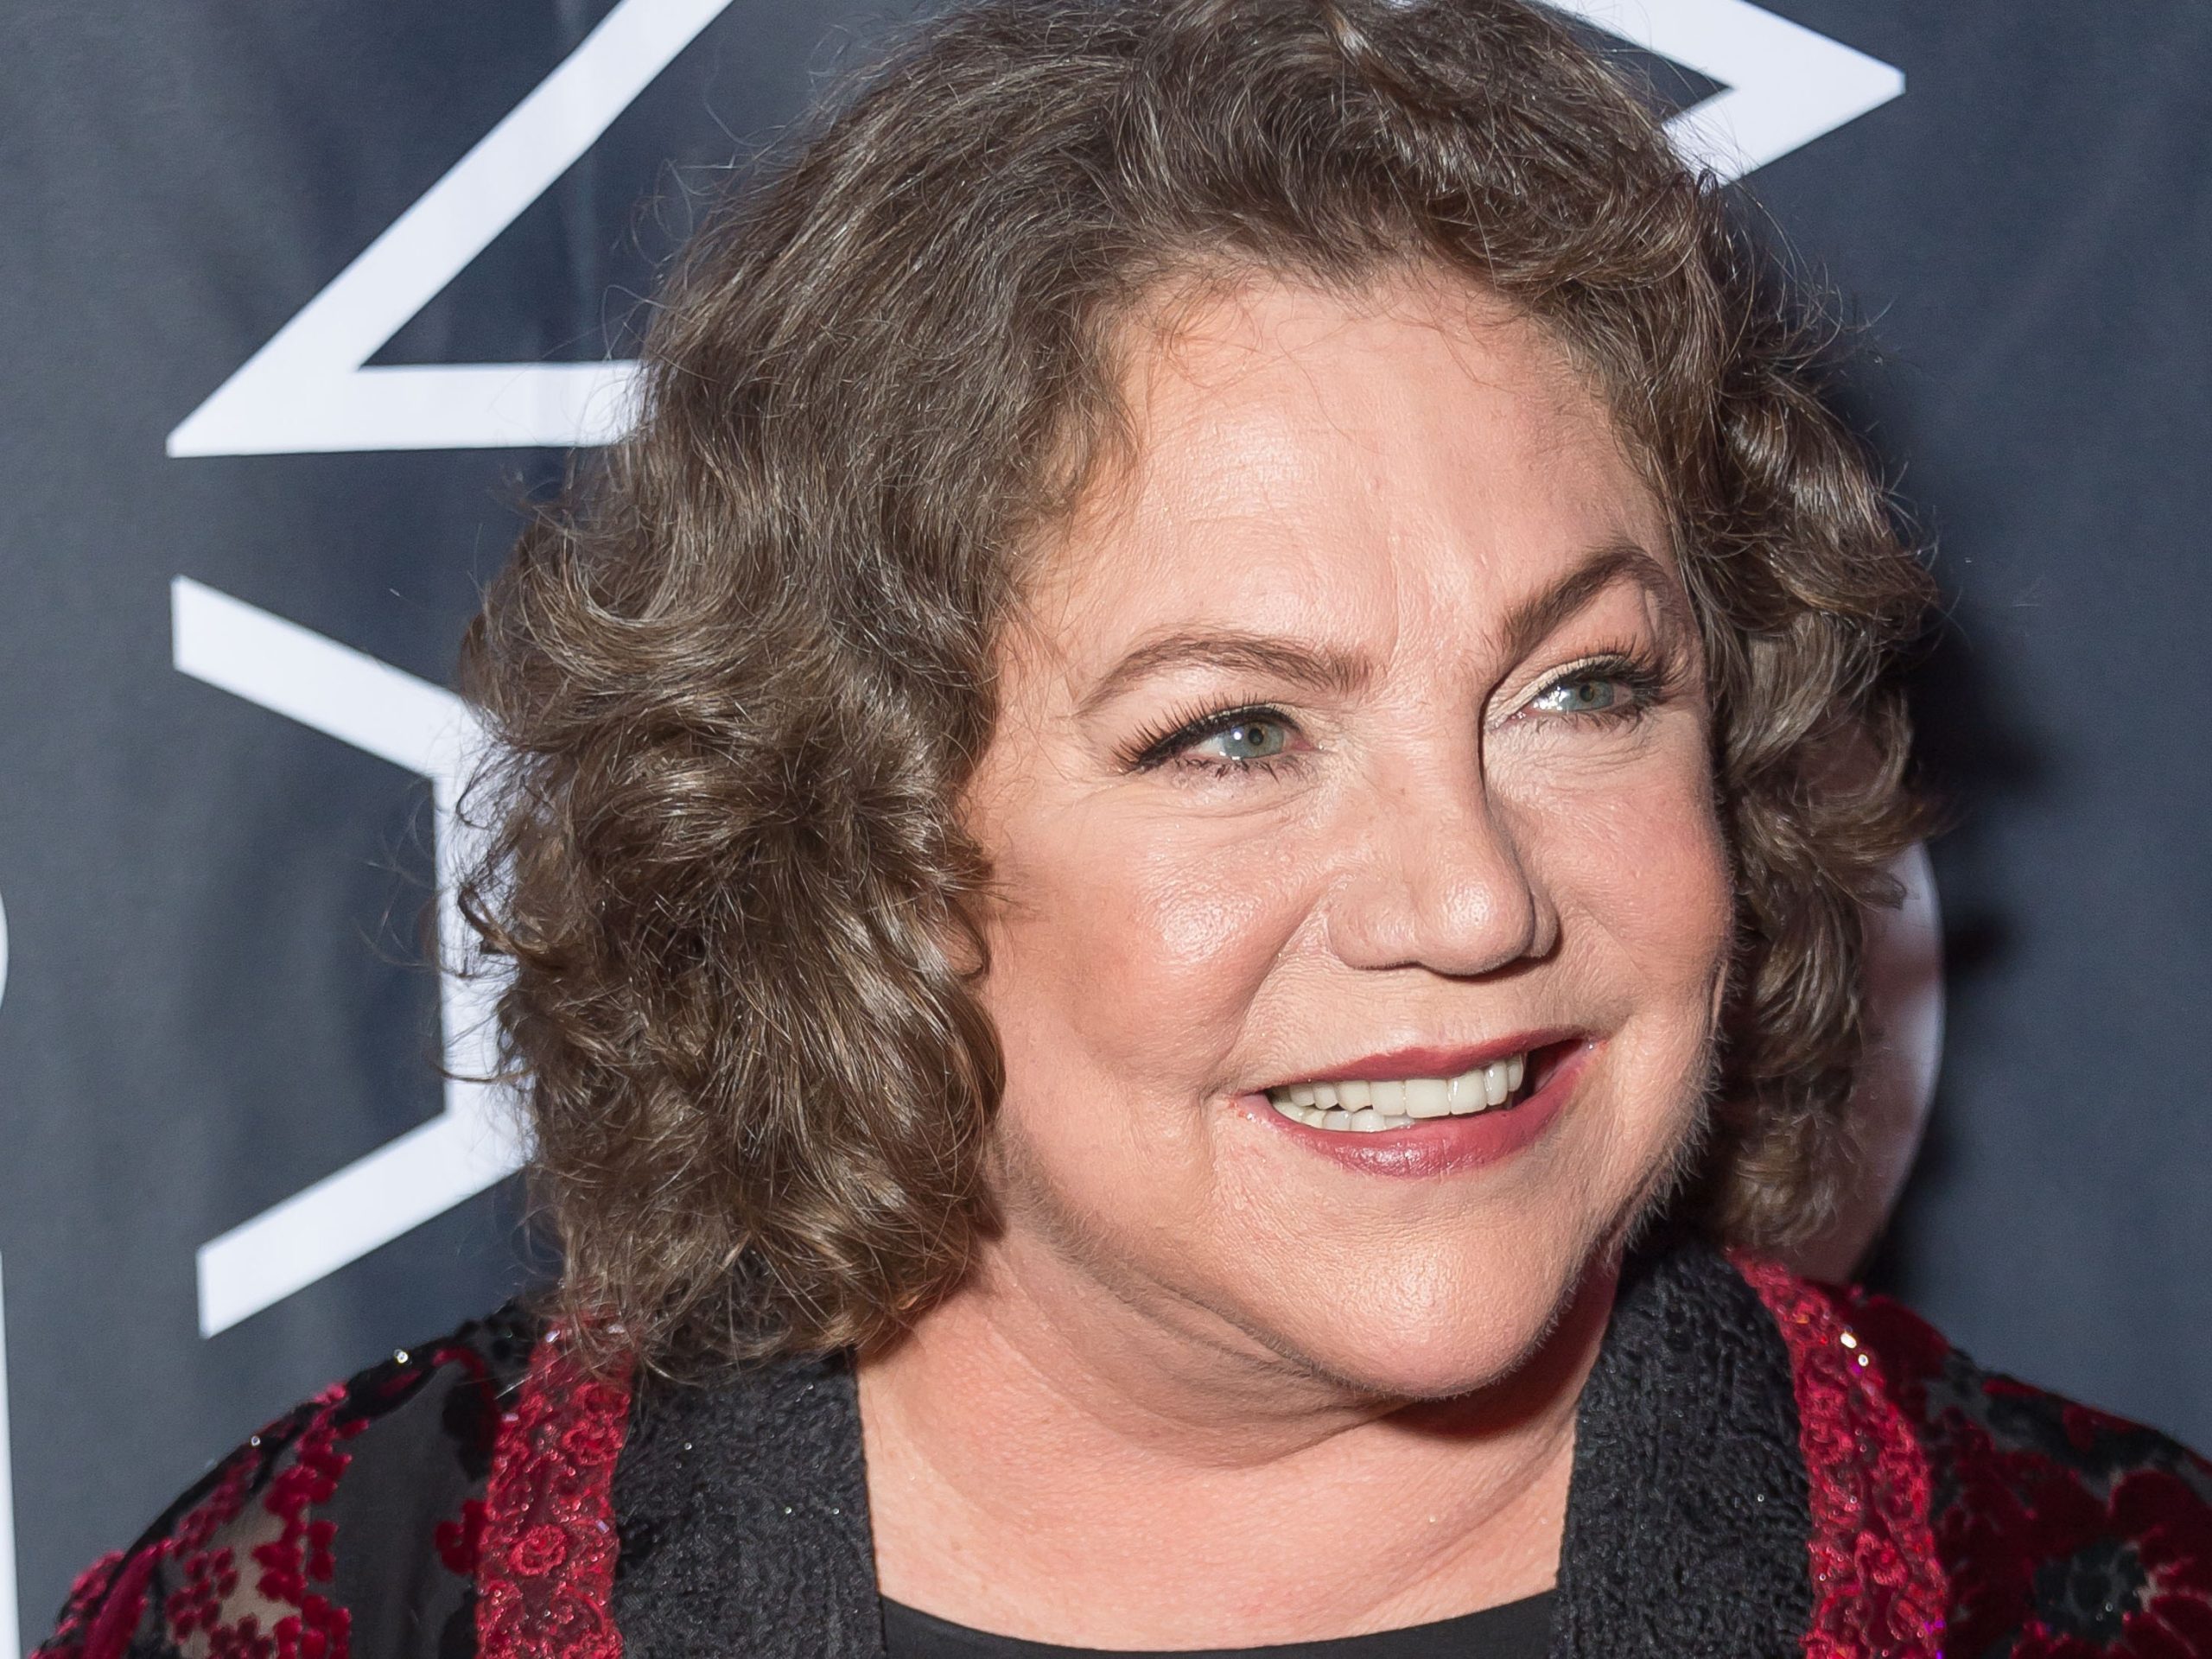 Kathleen Turner Wiki, Bio, Age, Net Worth, and Other Facts